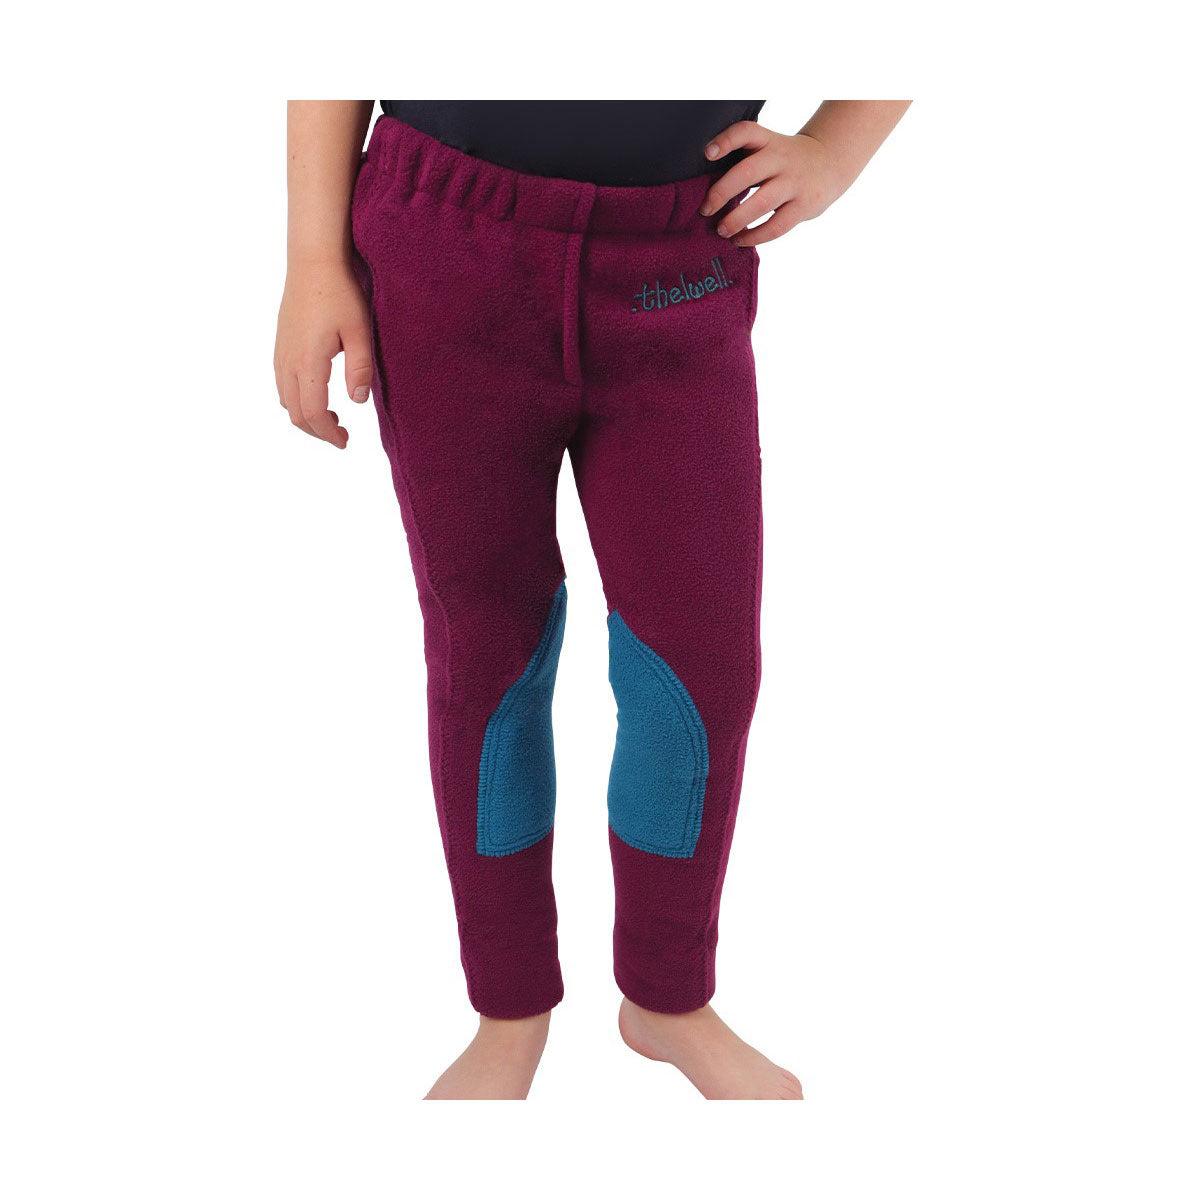 Hy Equestrian Thelwell Collection Pony Friends Fleece Tots Jodhpurs Imperial Purple/Pacific Blue 3-4 Years Barnstaple Equestrian Supplies